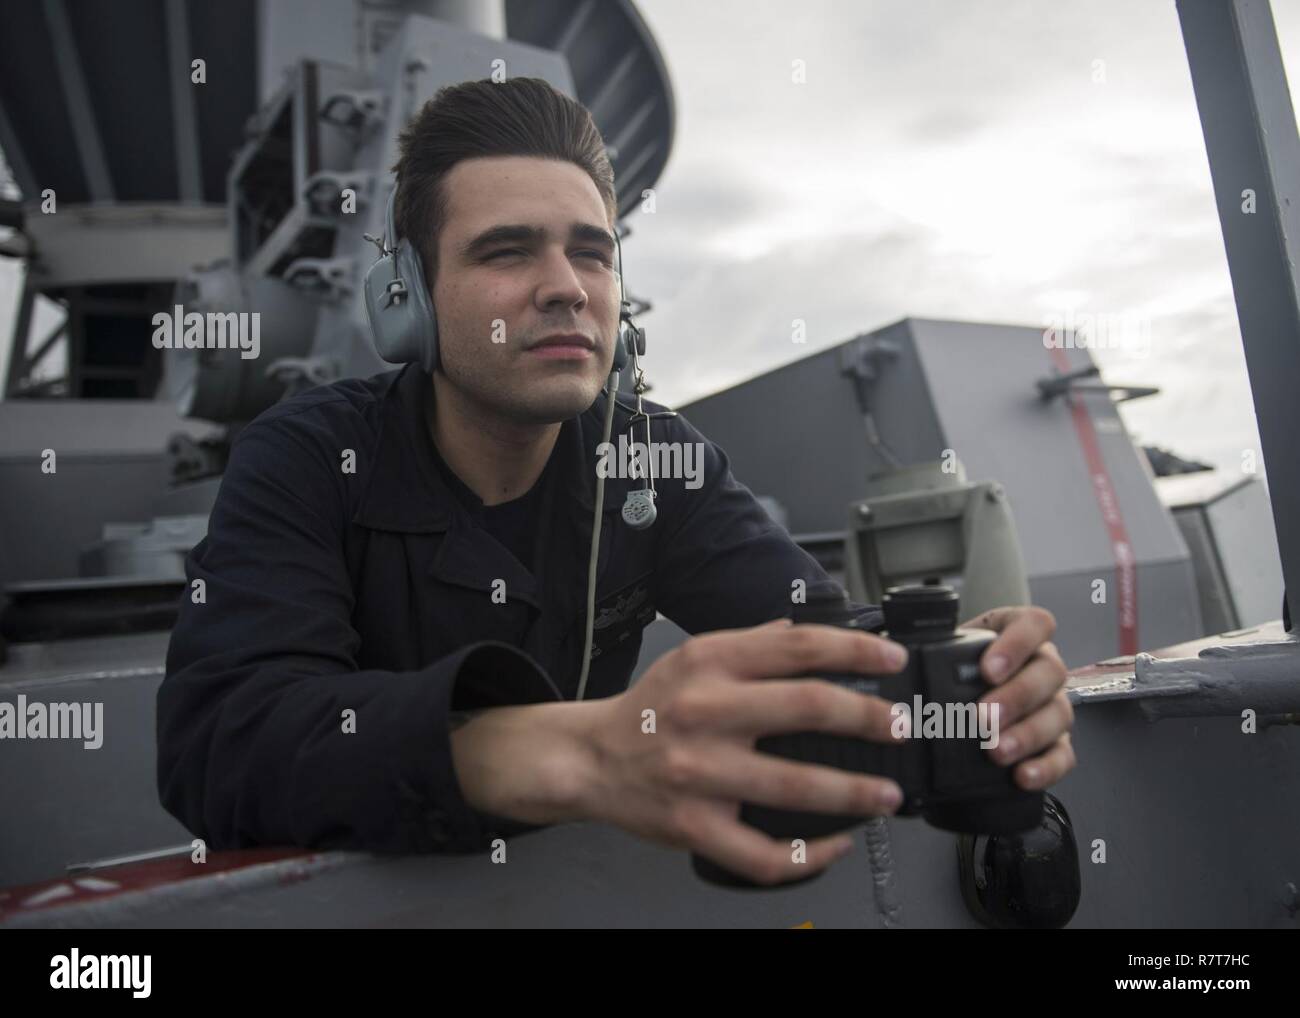 SOUTH CHINA SEA (April 4, 2017) Seaman Wesley Falcoa, from Aurora, Colo., scans the ocean for contacts while standing forward lookout aboard the amphibious assault ship USS Makin Island (LHD 8). Makin Island, the flagship for the Makin Island Amphibious Ready Group, with the embarked 11th Marine Expeditionary Unit (11th MEU), is operating in the Indo-Asia-Pacific region to enhance amphibious capability with regional partners and to serve as a ready-response force for any type of contingency. Stock Photo